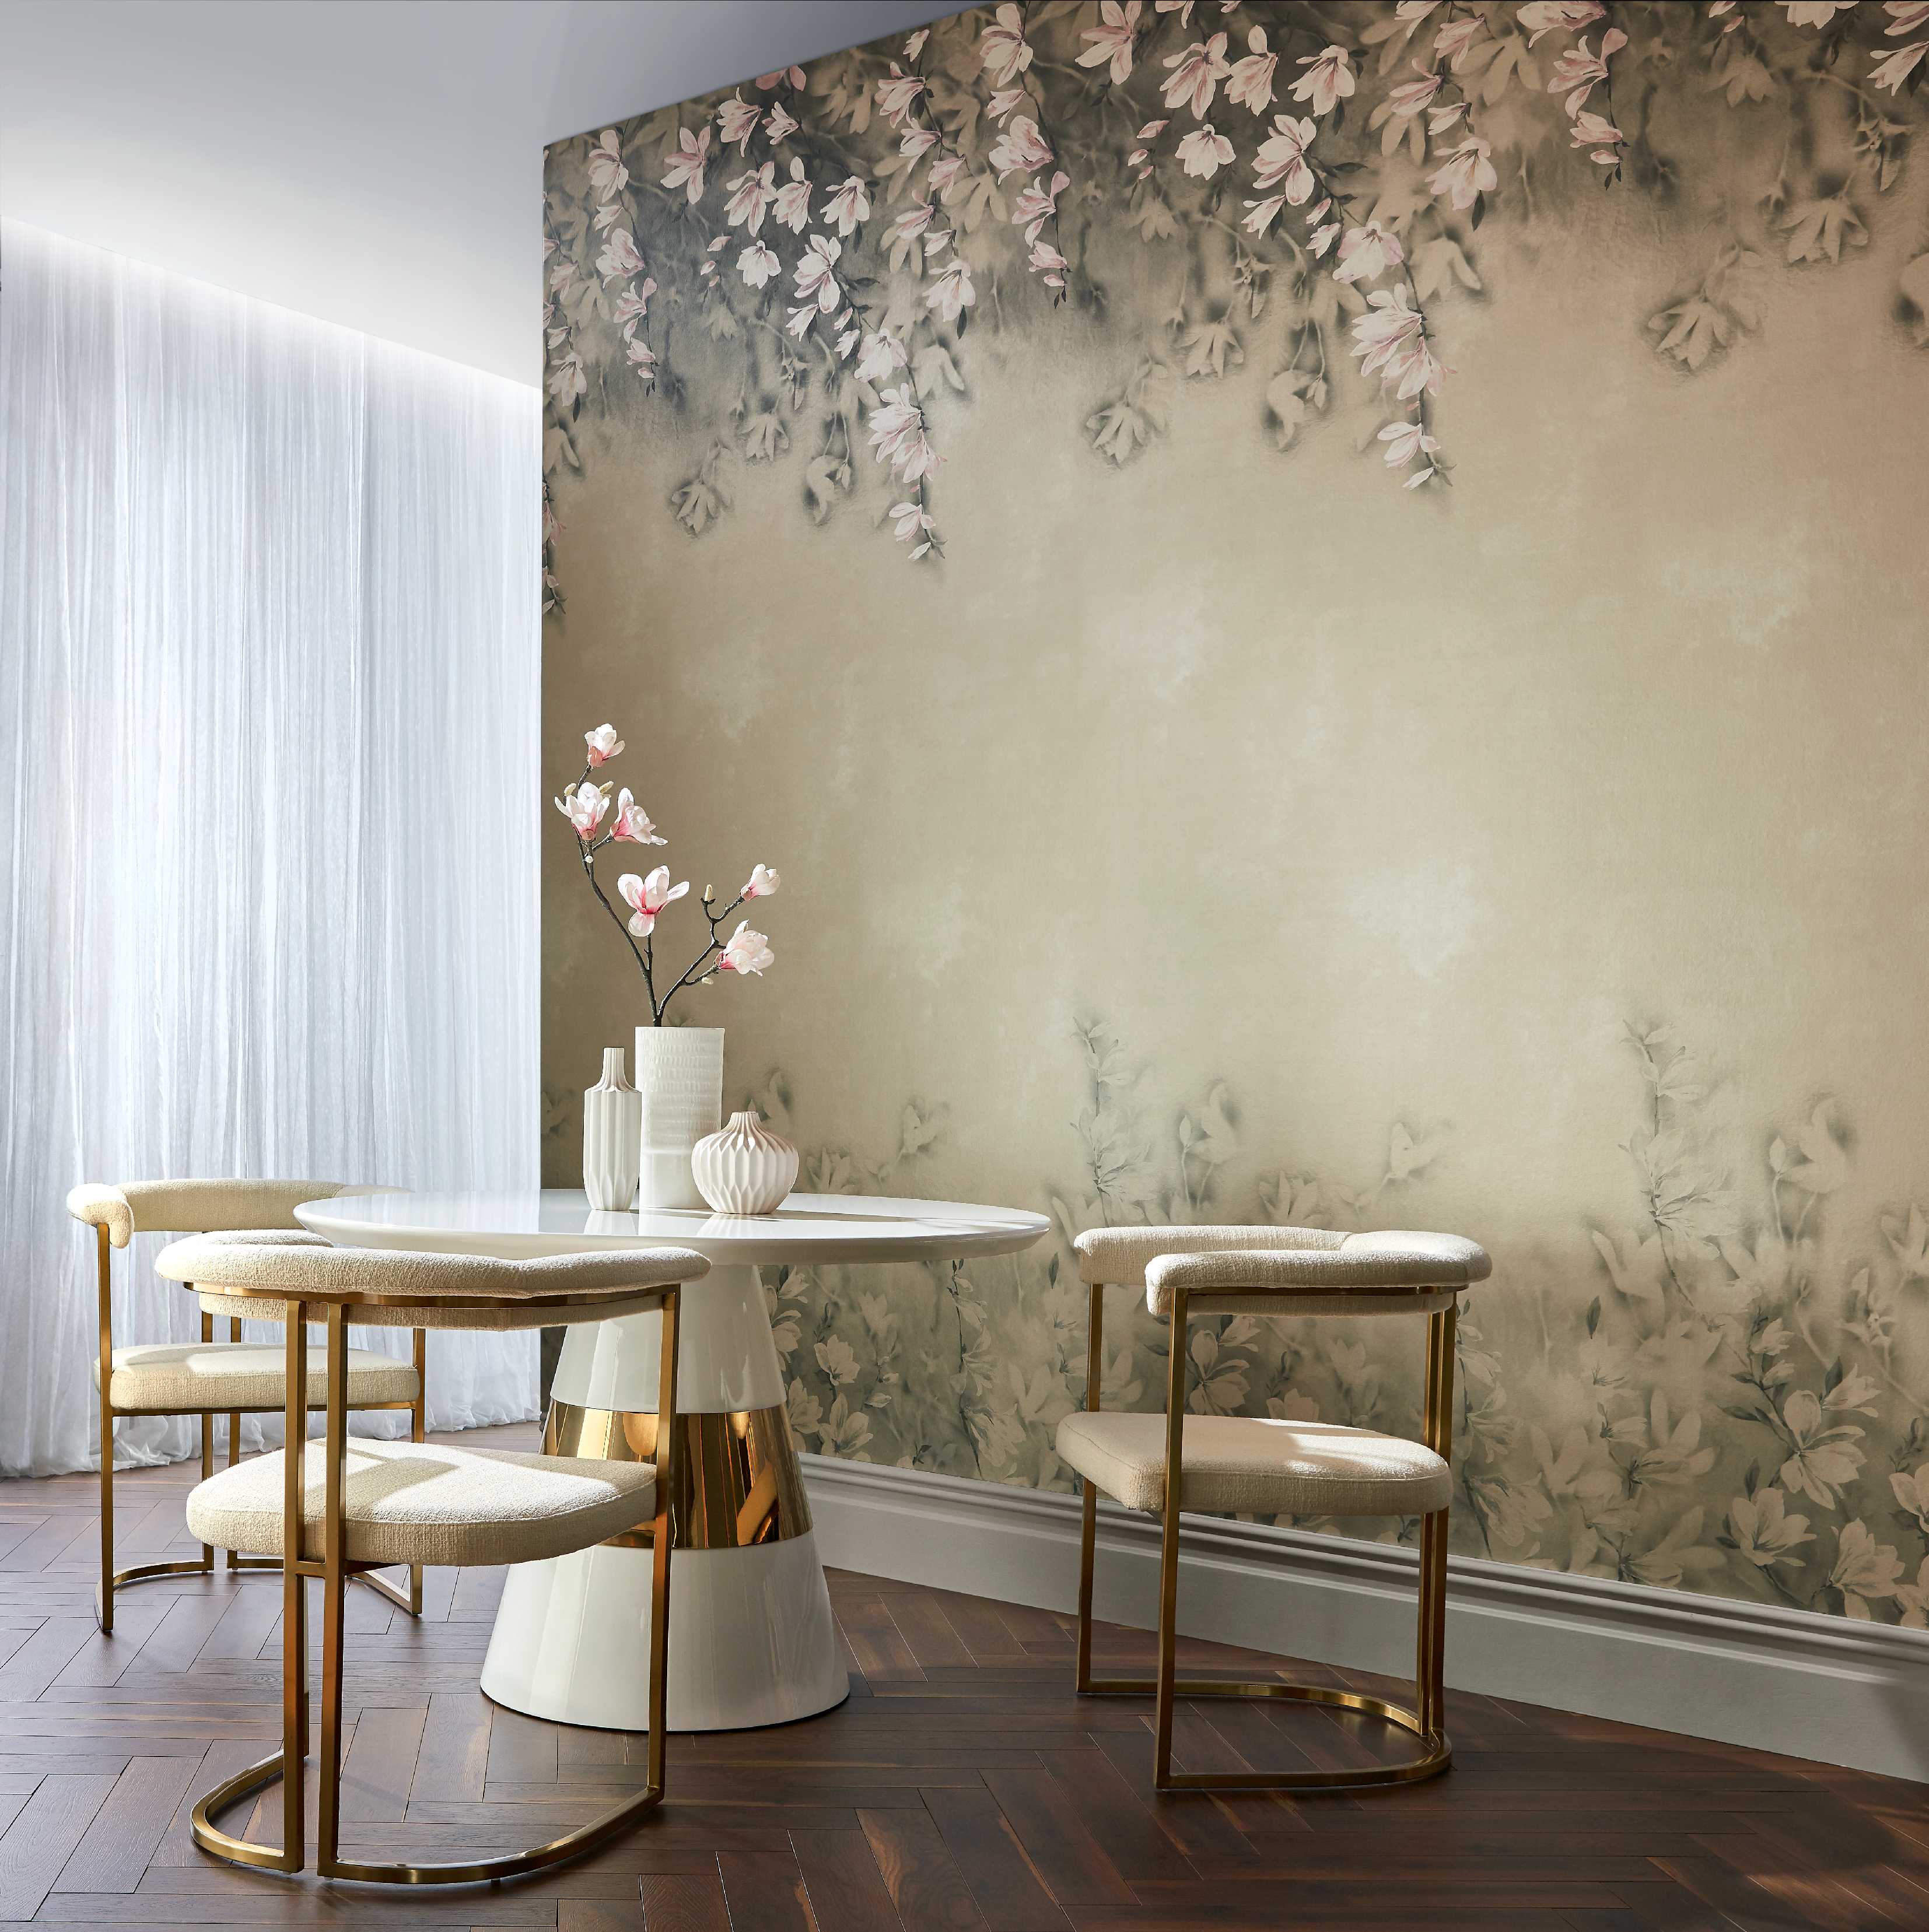 Tapet Trailing Magnolia, 1838 Wallcoverings, 6.5mp / rola 1838 Wallcoverings